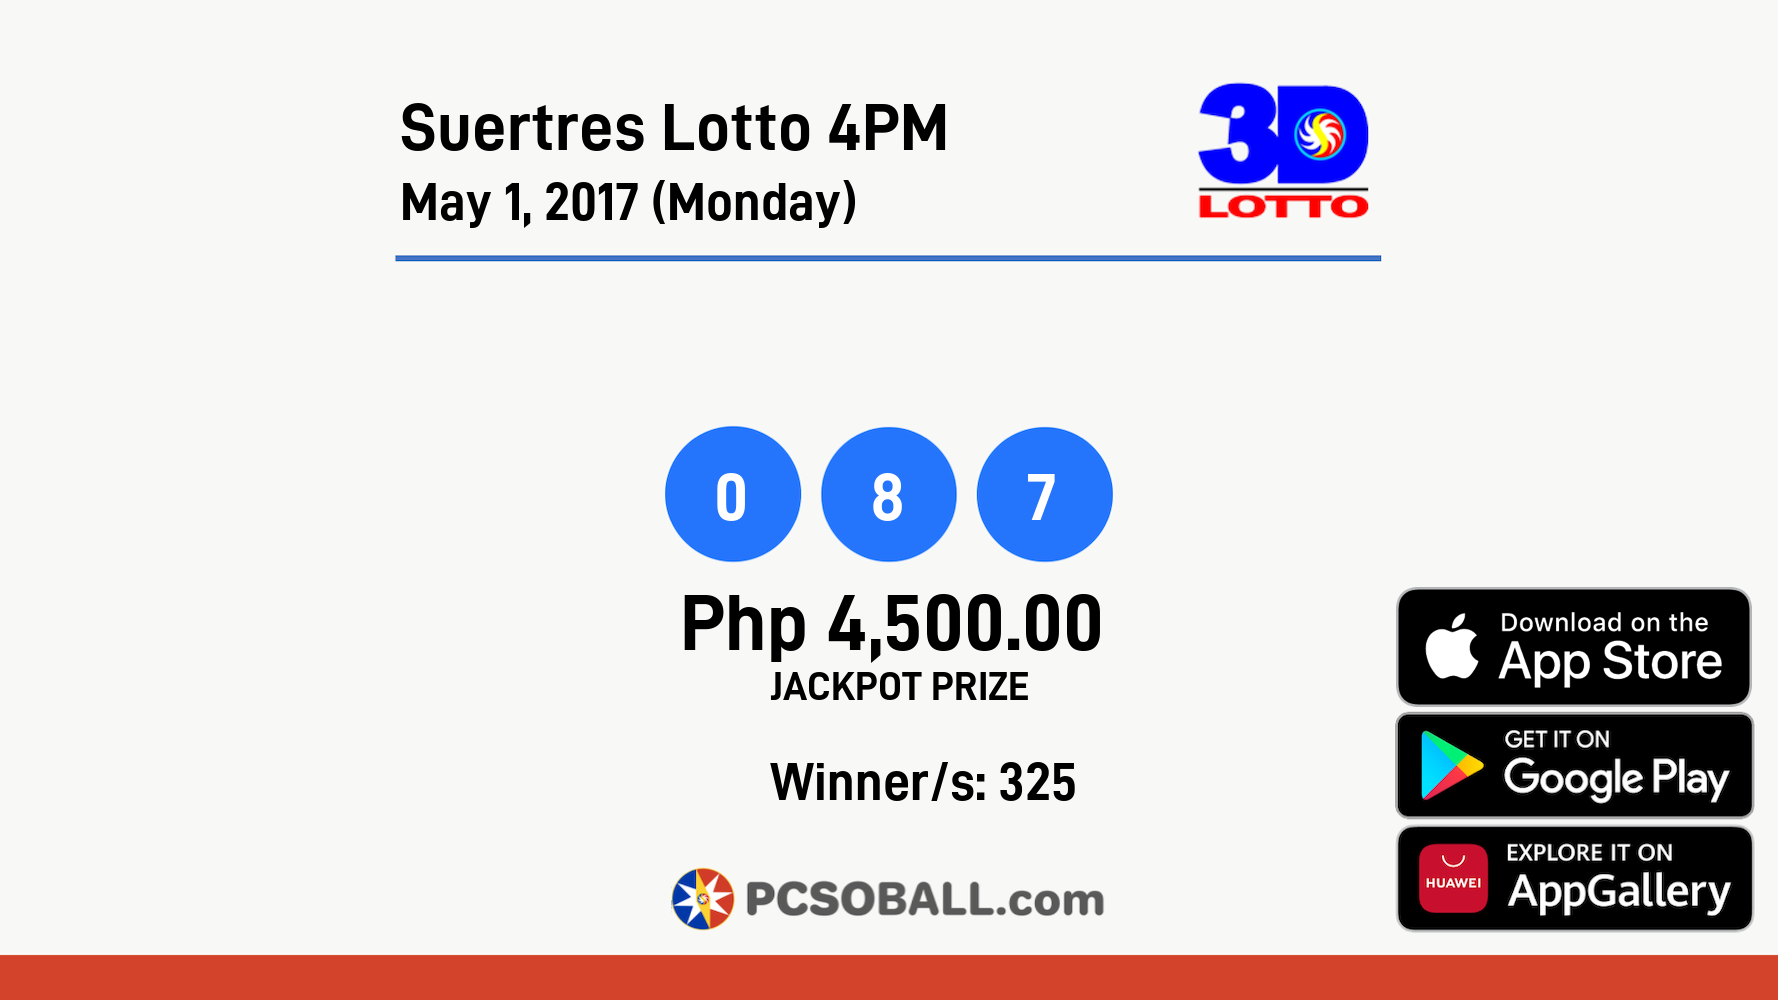 Suertres Lotto 4PM May 1, 2017 (Monday) Result